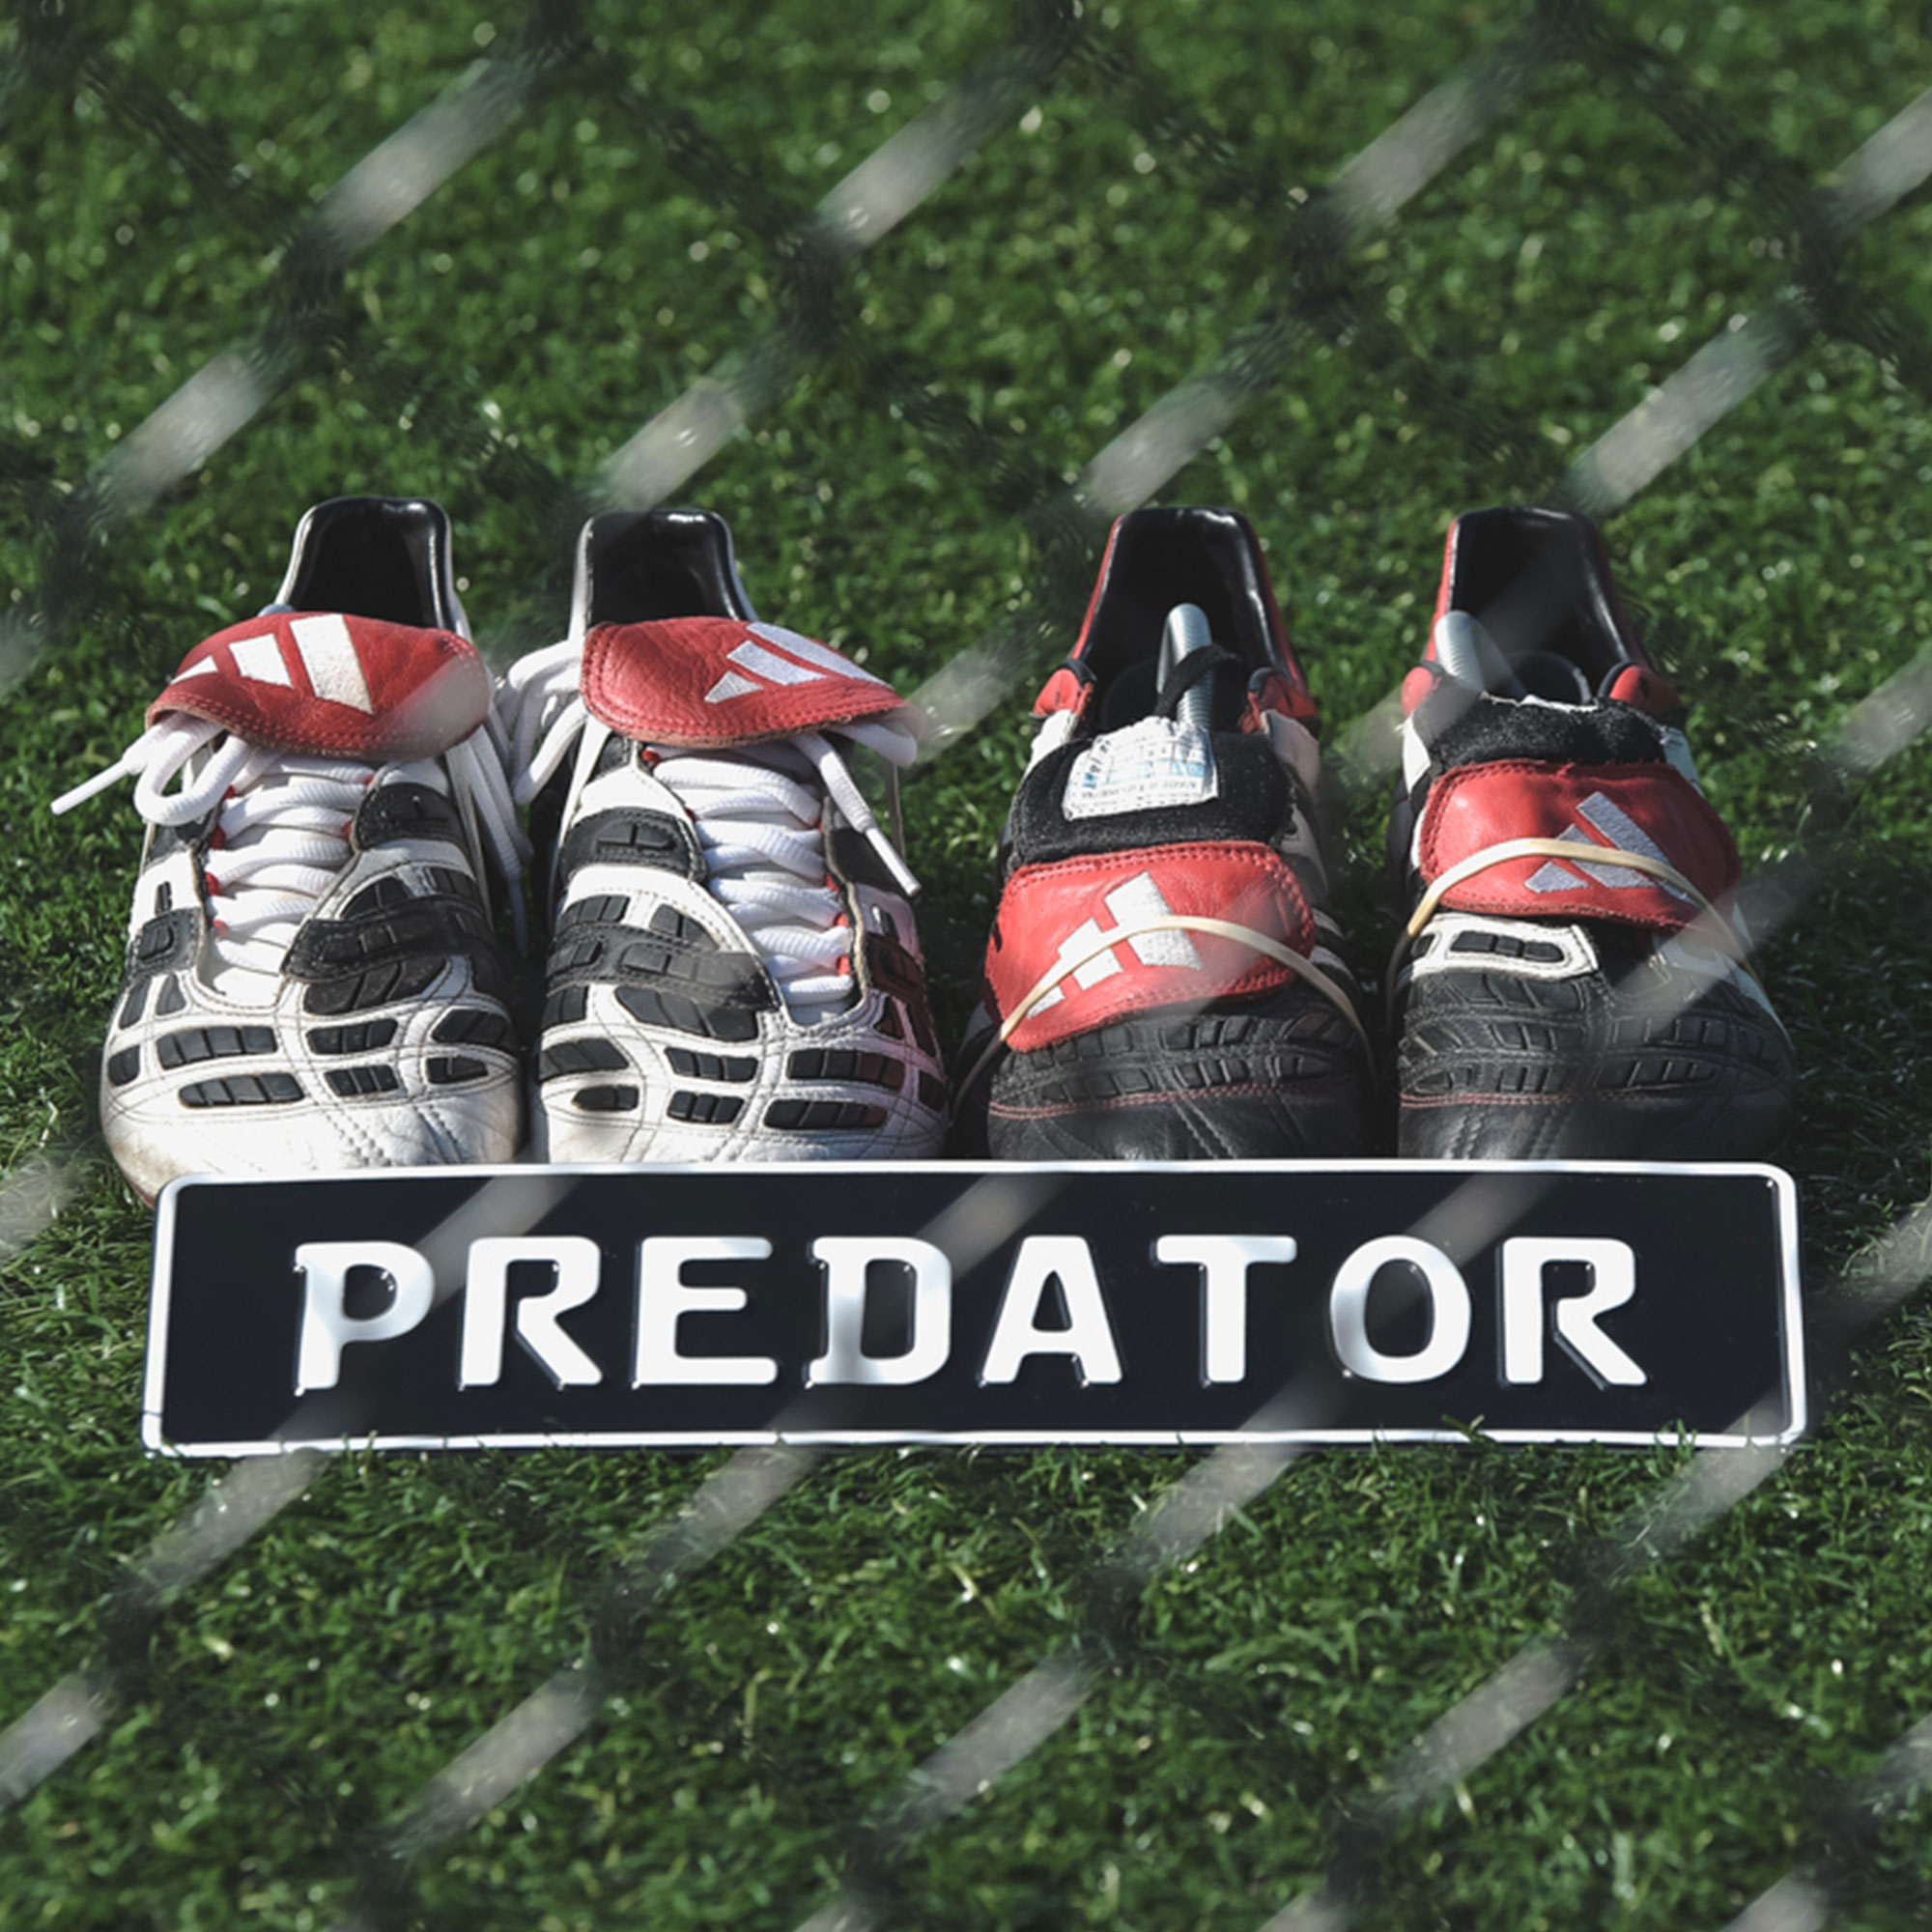 Adidas Predator - The Old and The New